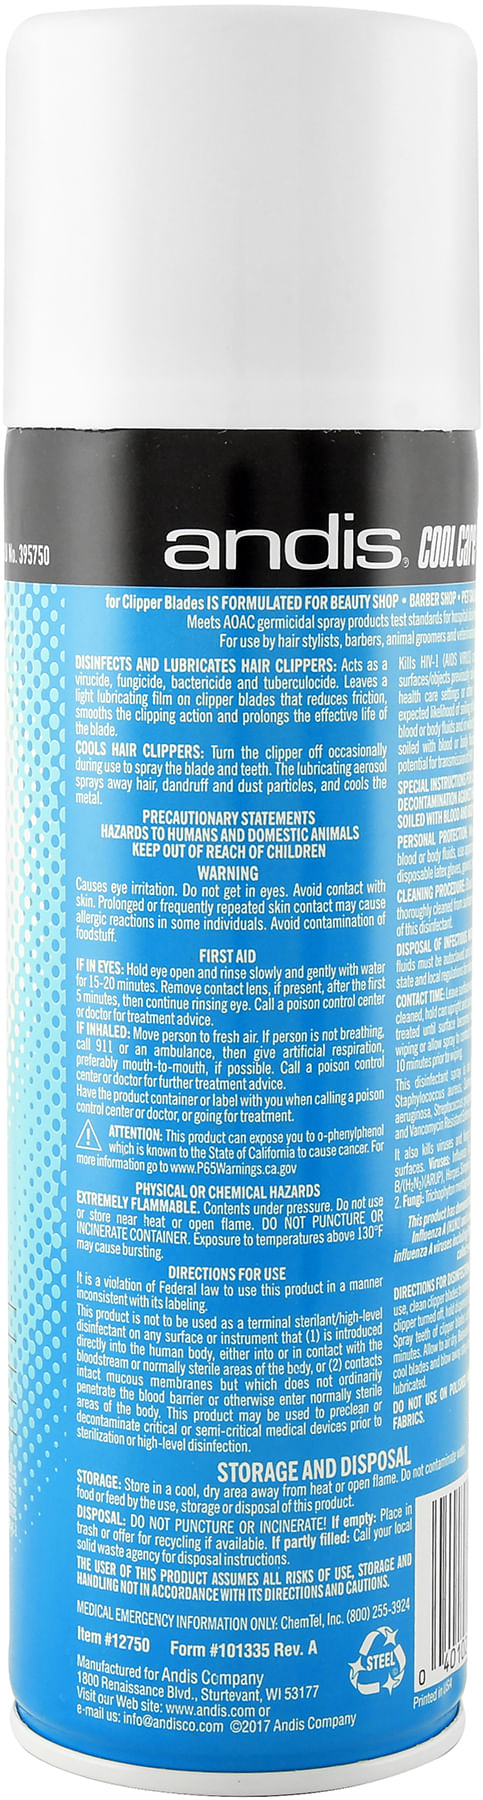 Andis Cool Care Plus For Blades, 15.5 Ounce (Pack of 2)